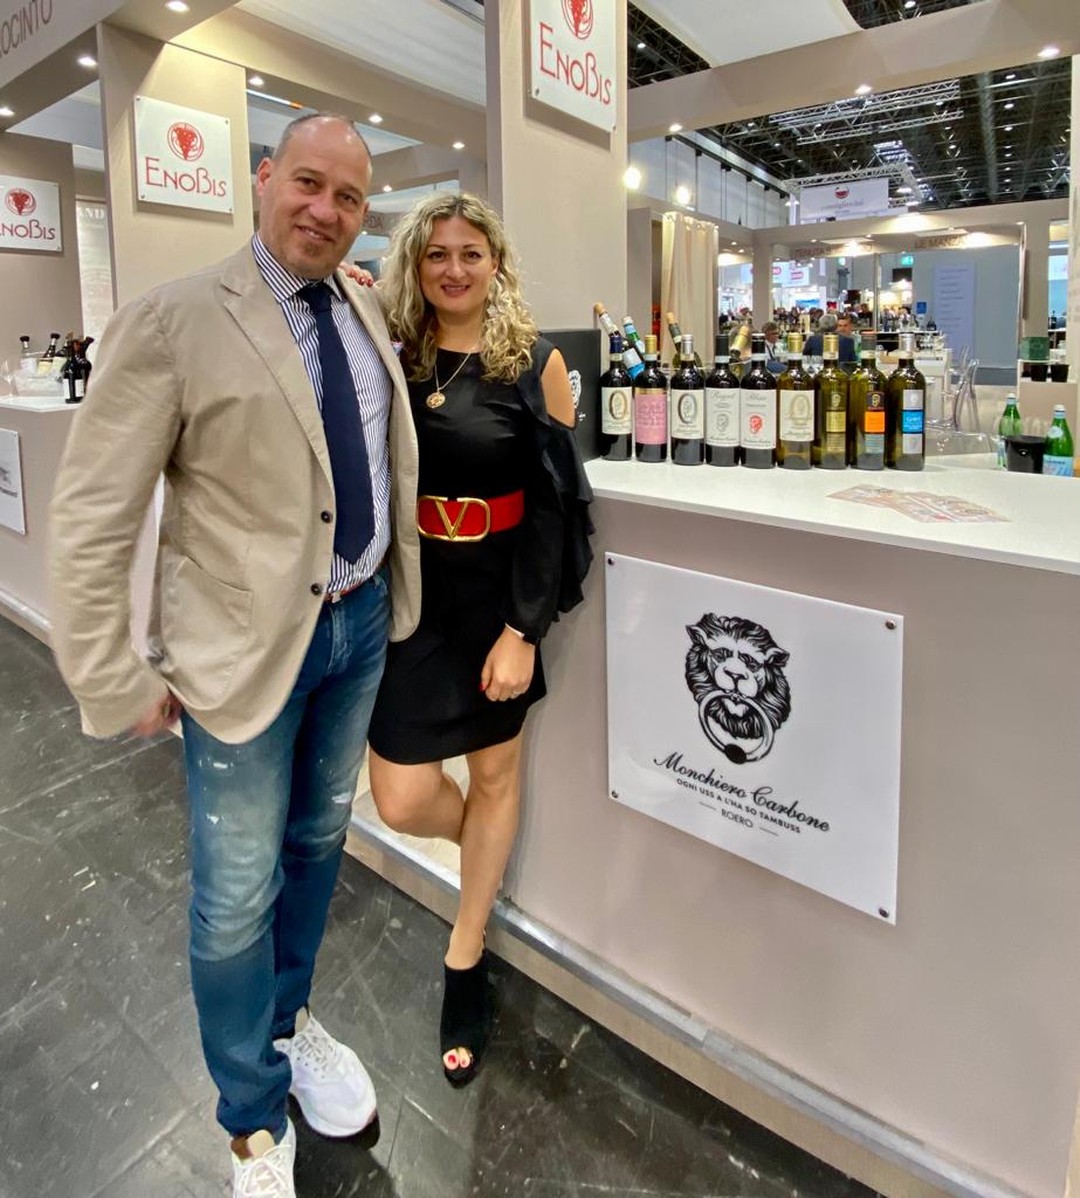 Rieccoci a @prowein_tradefair! Per chi di voi è a Düsseldorf in questi giorni, vi aspettiamo alla HALL 16 / G03!
-
-
-
We are back to @prowein_tradefair! For the people here in Düsseldorf in these days, we will be waiting for you at HALL 16 / G03!

#roero #roerogoestoprowein #prowein2022 #dusseldorf #monchierocarbone #monchierocarbonewinery #monchierocarbonegoestoprowein #winefair #winepassion #winelover